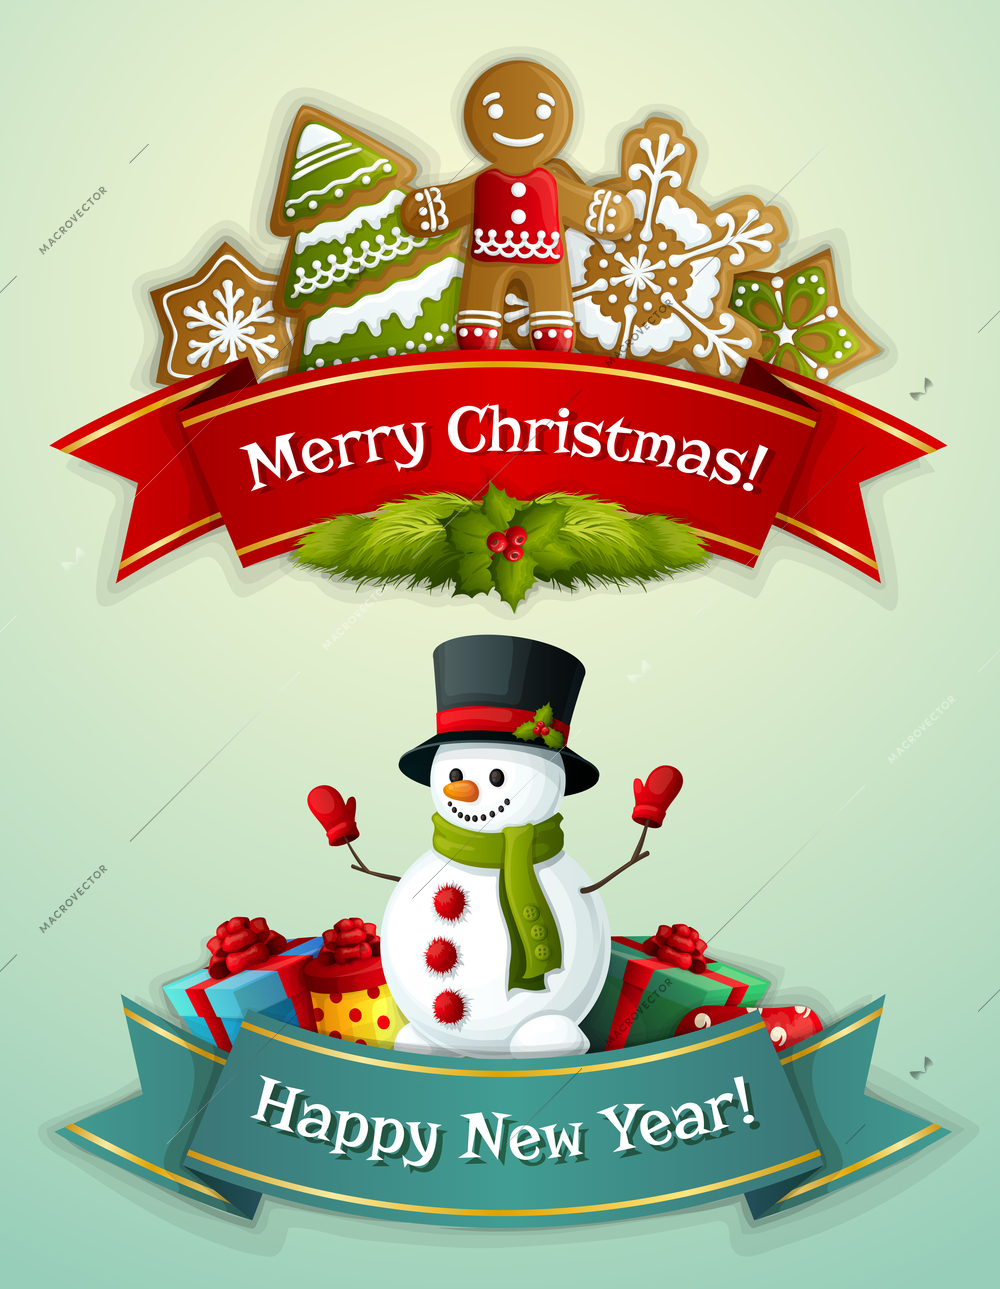 Merry christmas and happy new year ribbon banner set with ginger man and snowman with gift boxes isolated vector illustration